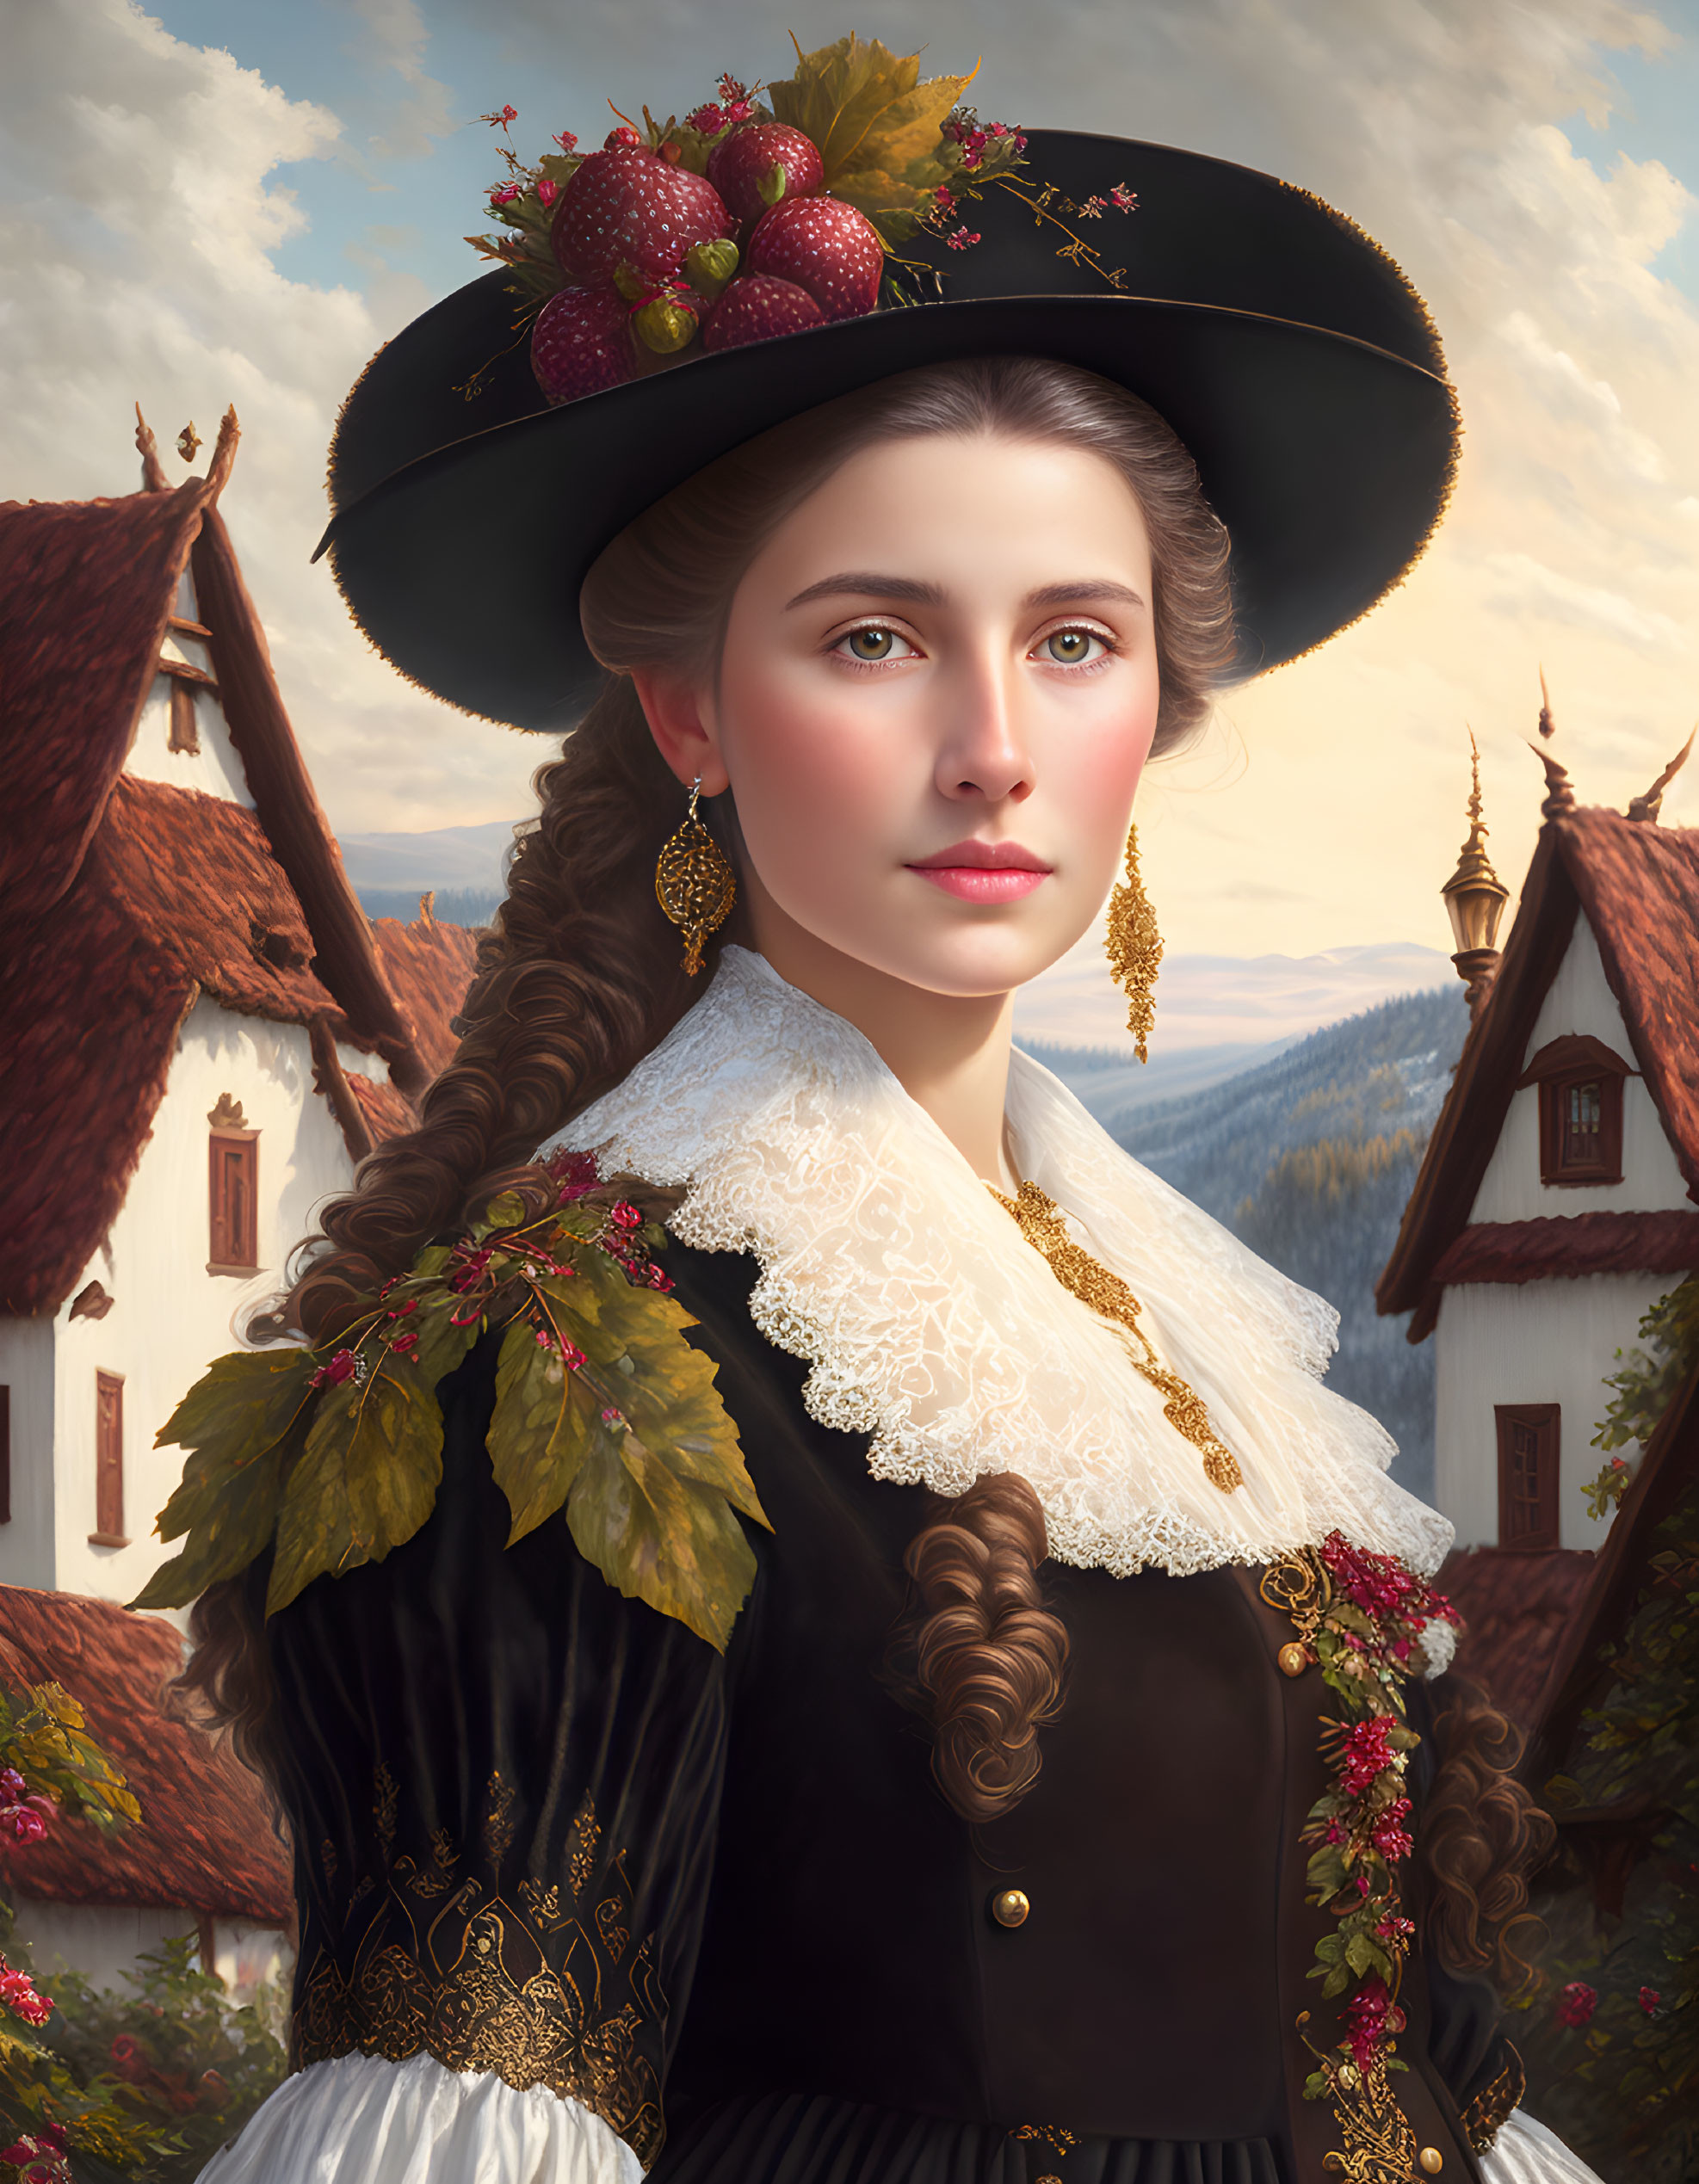 Portrait of woman with braided hair, traditional hat, lace collar, and alpine backdrop